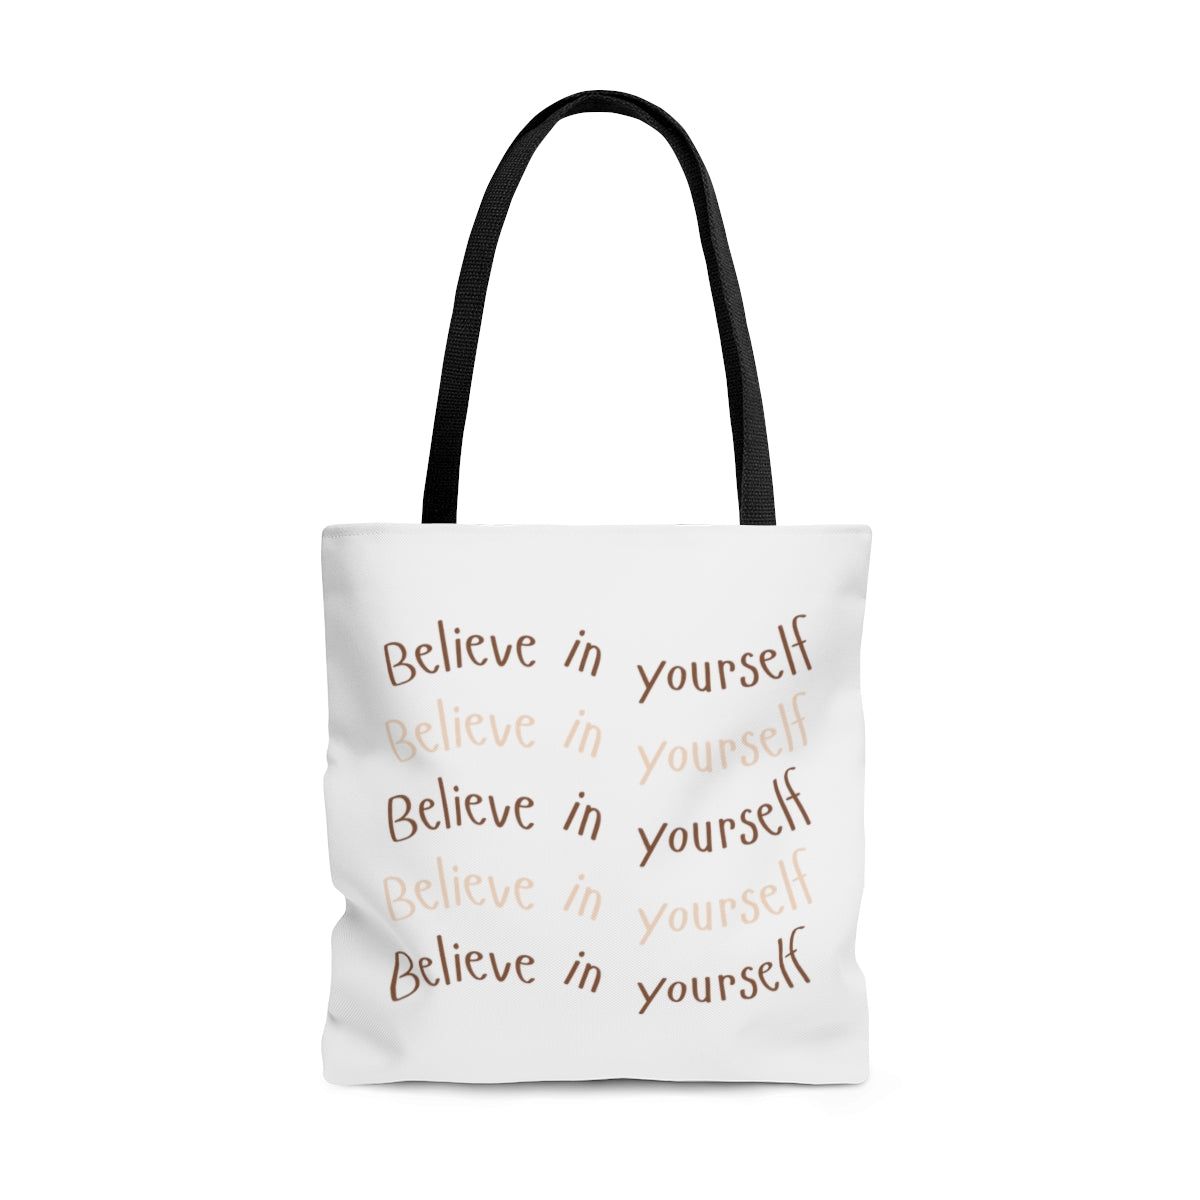 Believe In Yourself Durable Motivational Tote Bag- Inspirational Tote Bag, Laptop Tote Bag, Office Tote Bag, Self-Care Gift Tote Bag, Tote Purse